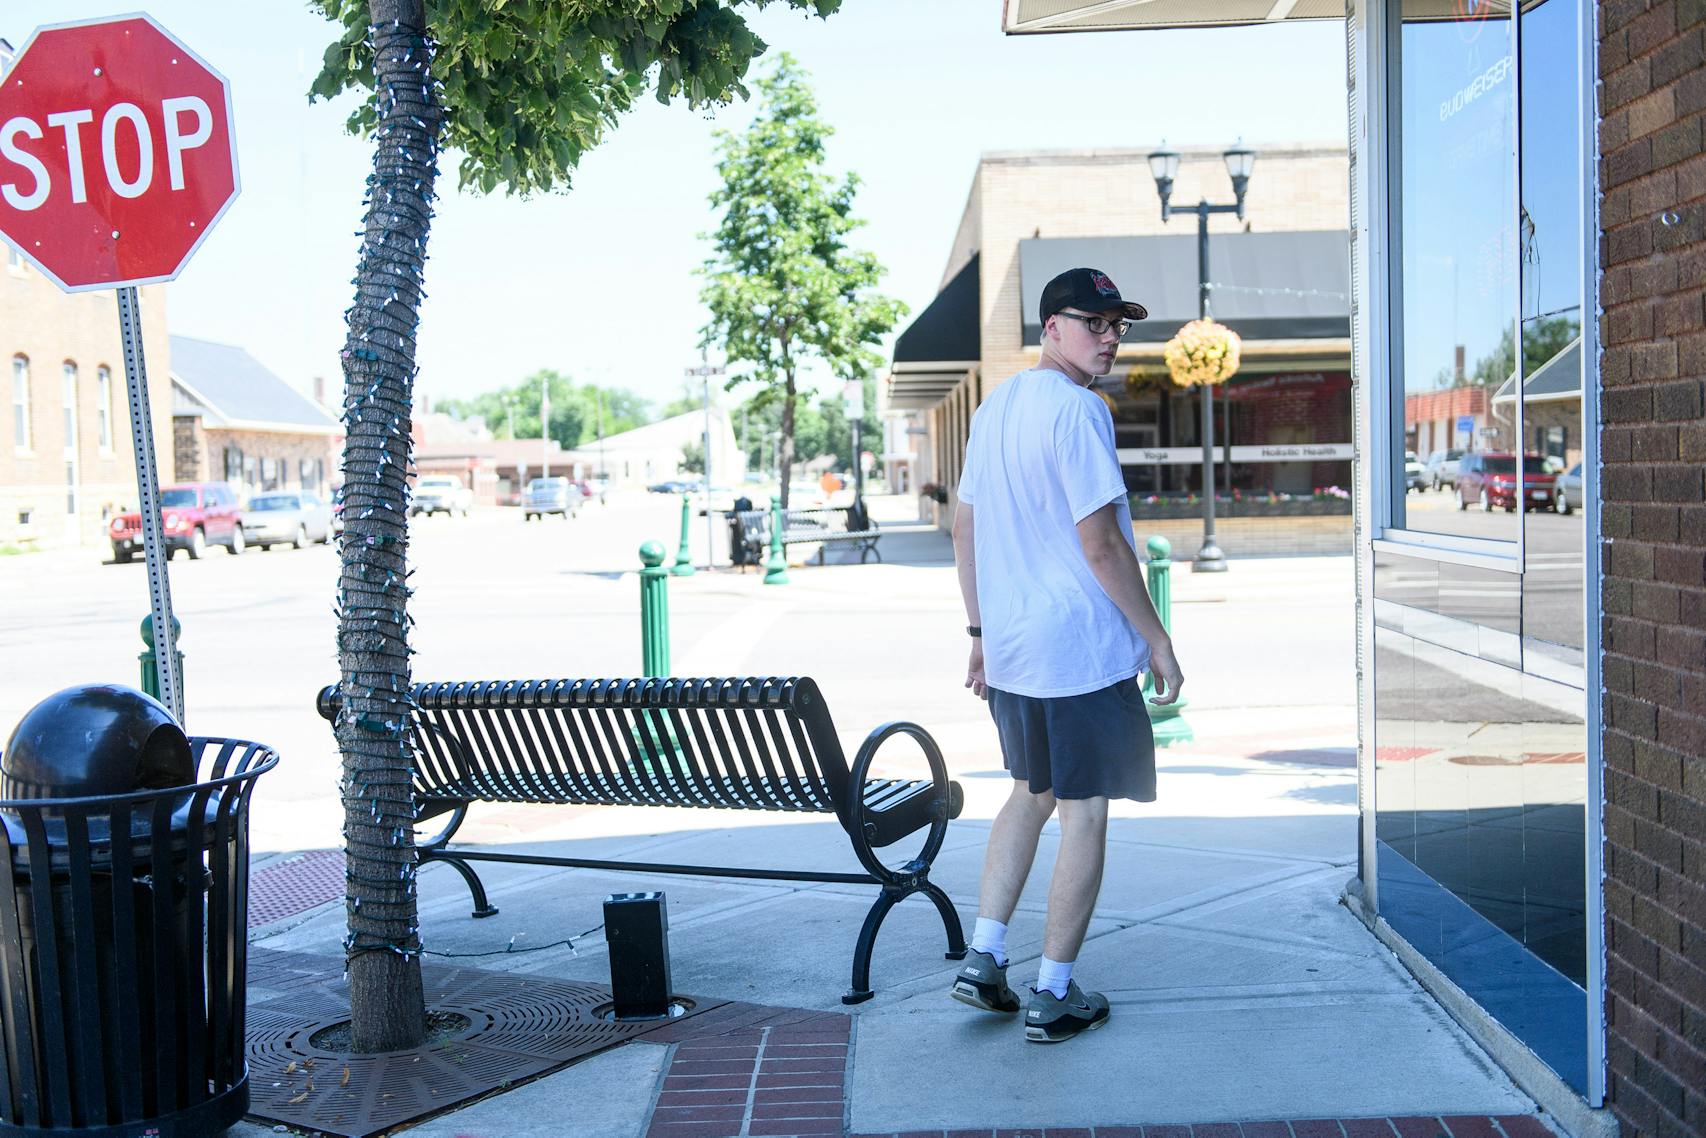 LaDue, in downtown Waseca, is rebuilding his life by trying to better himself and find happiness.